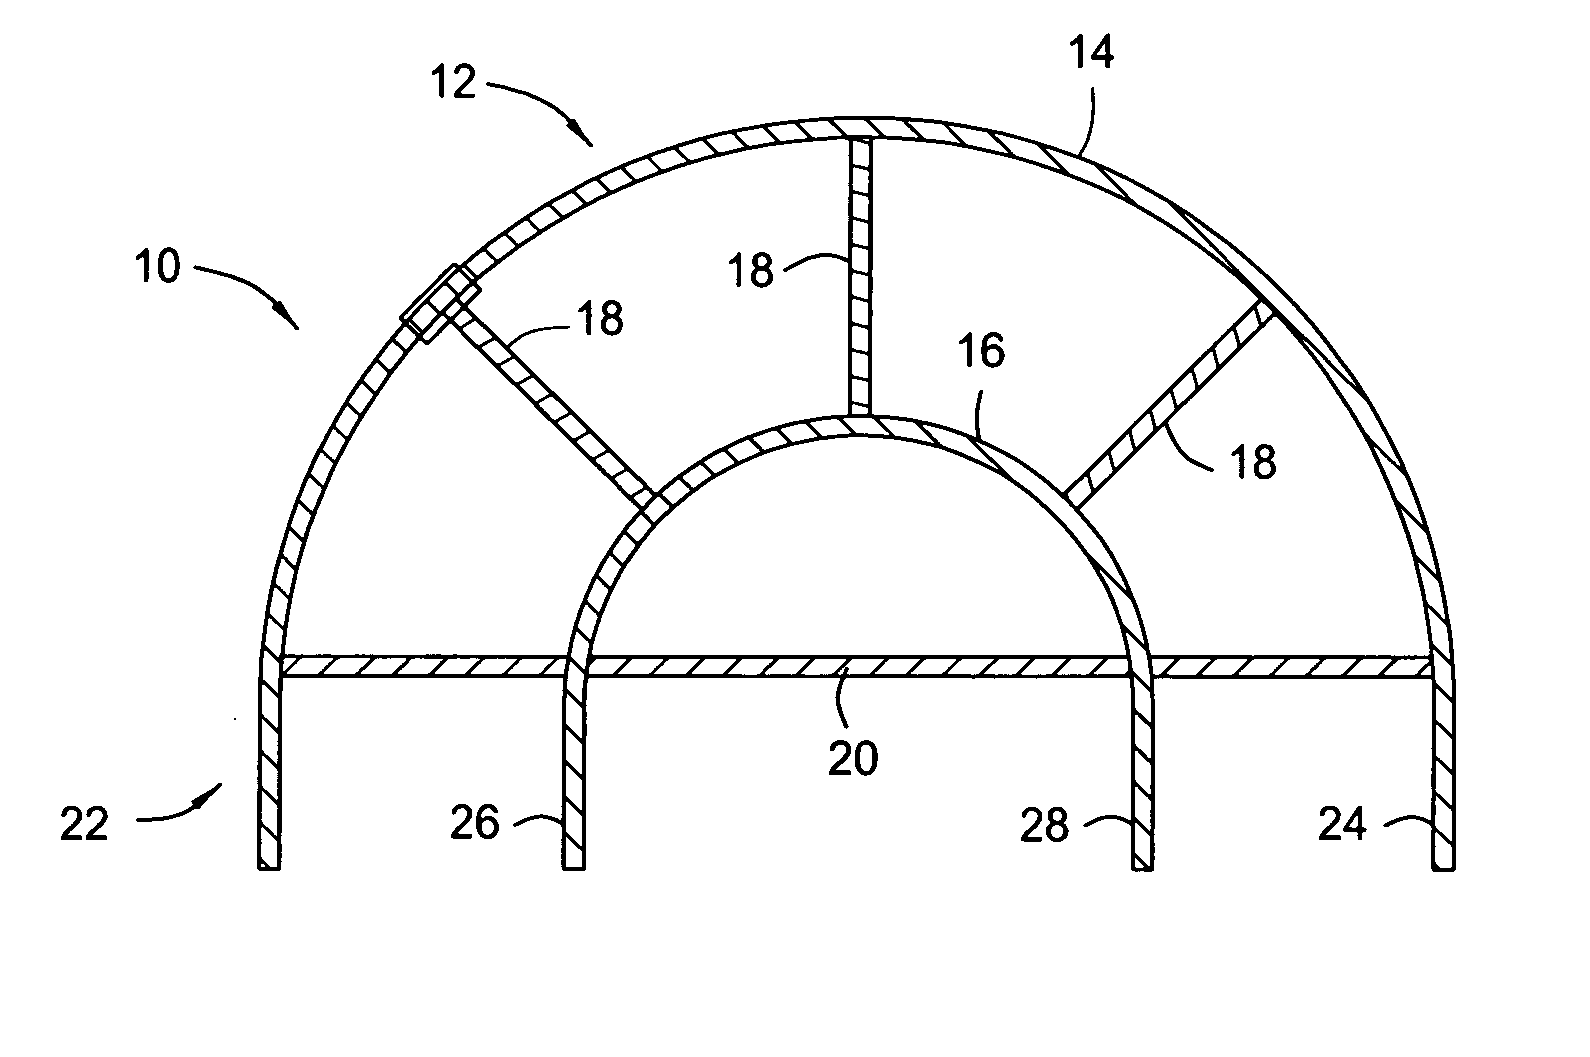 System, kit and apparatus for attachment of external fixators for bone realignment